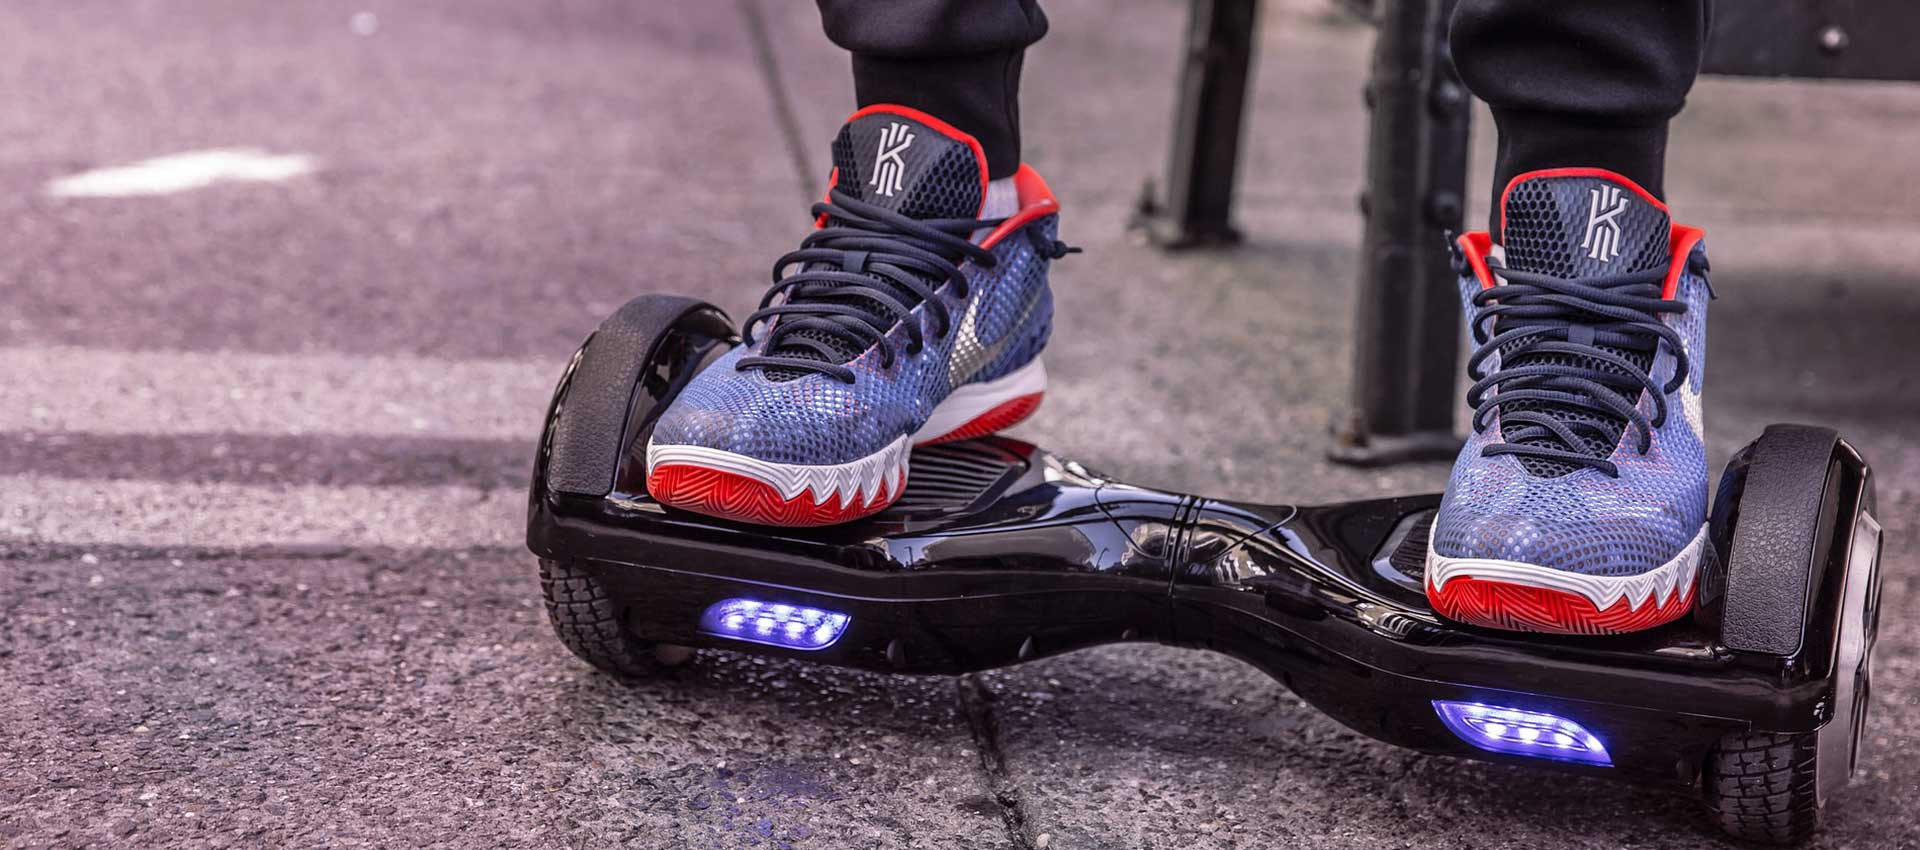 Top 10 Hoverboards you can easily buy in Pakistan